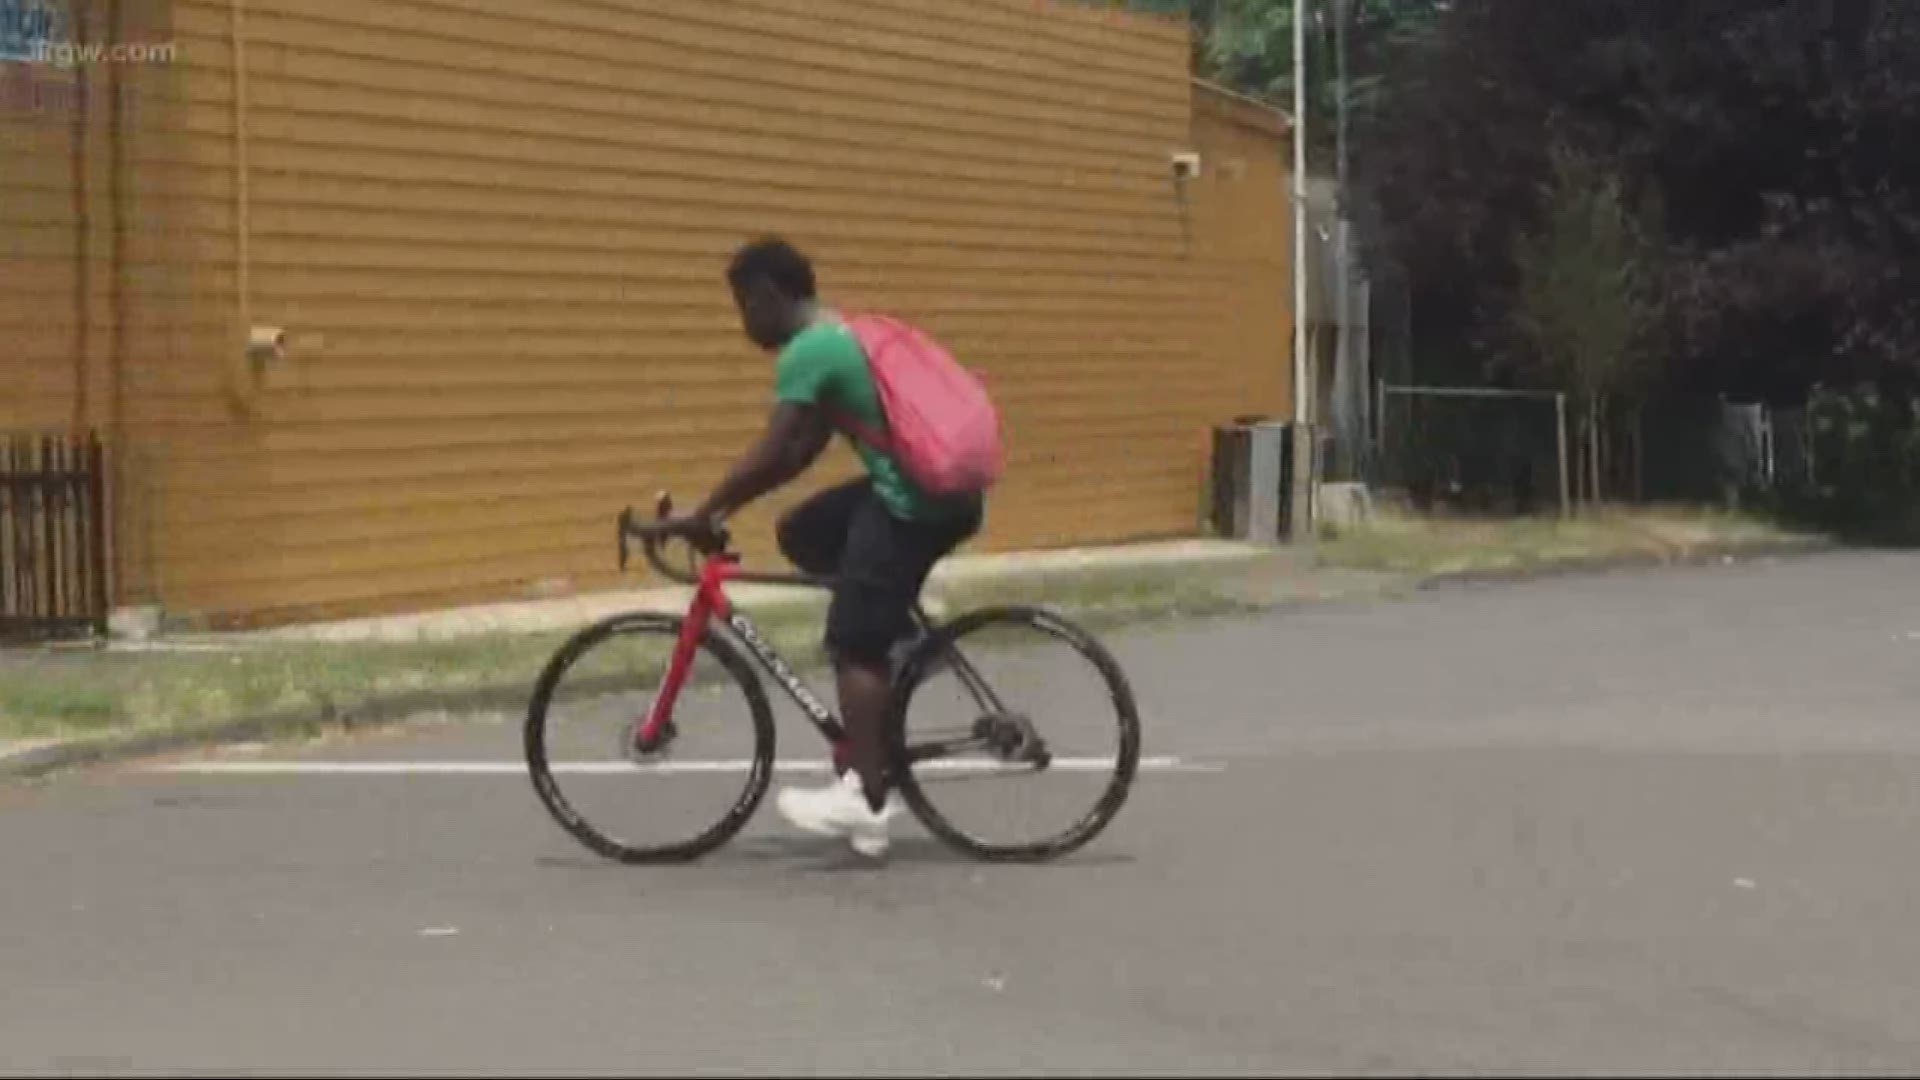 A bike rider was attacked in Gresham and thieves stole his road bike.